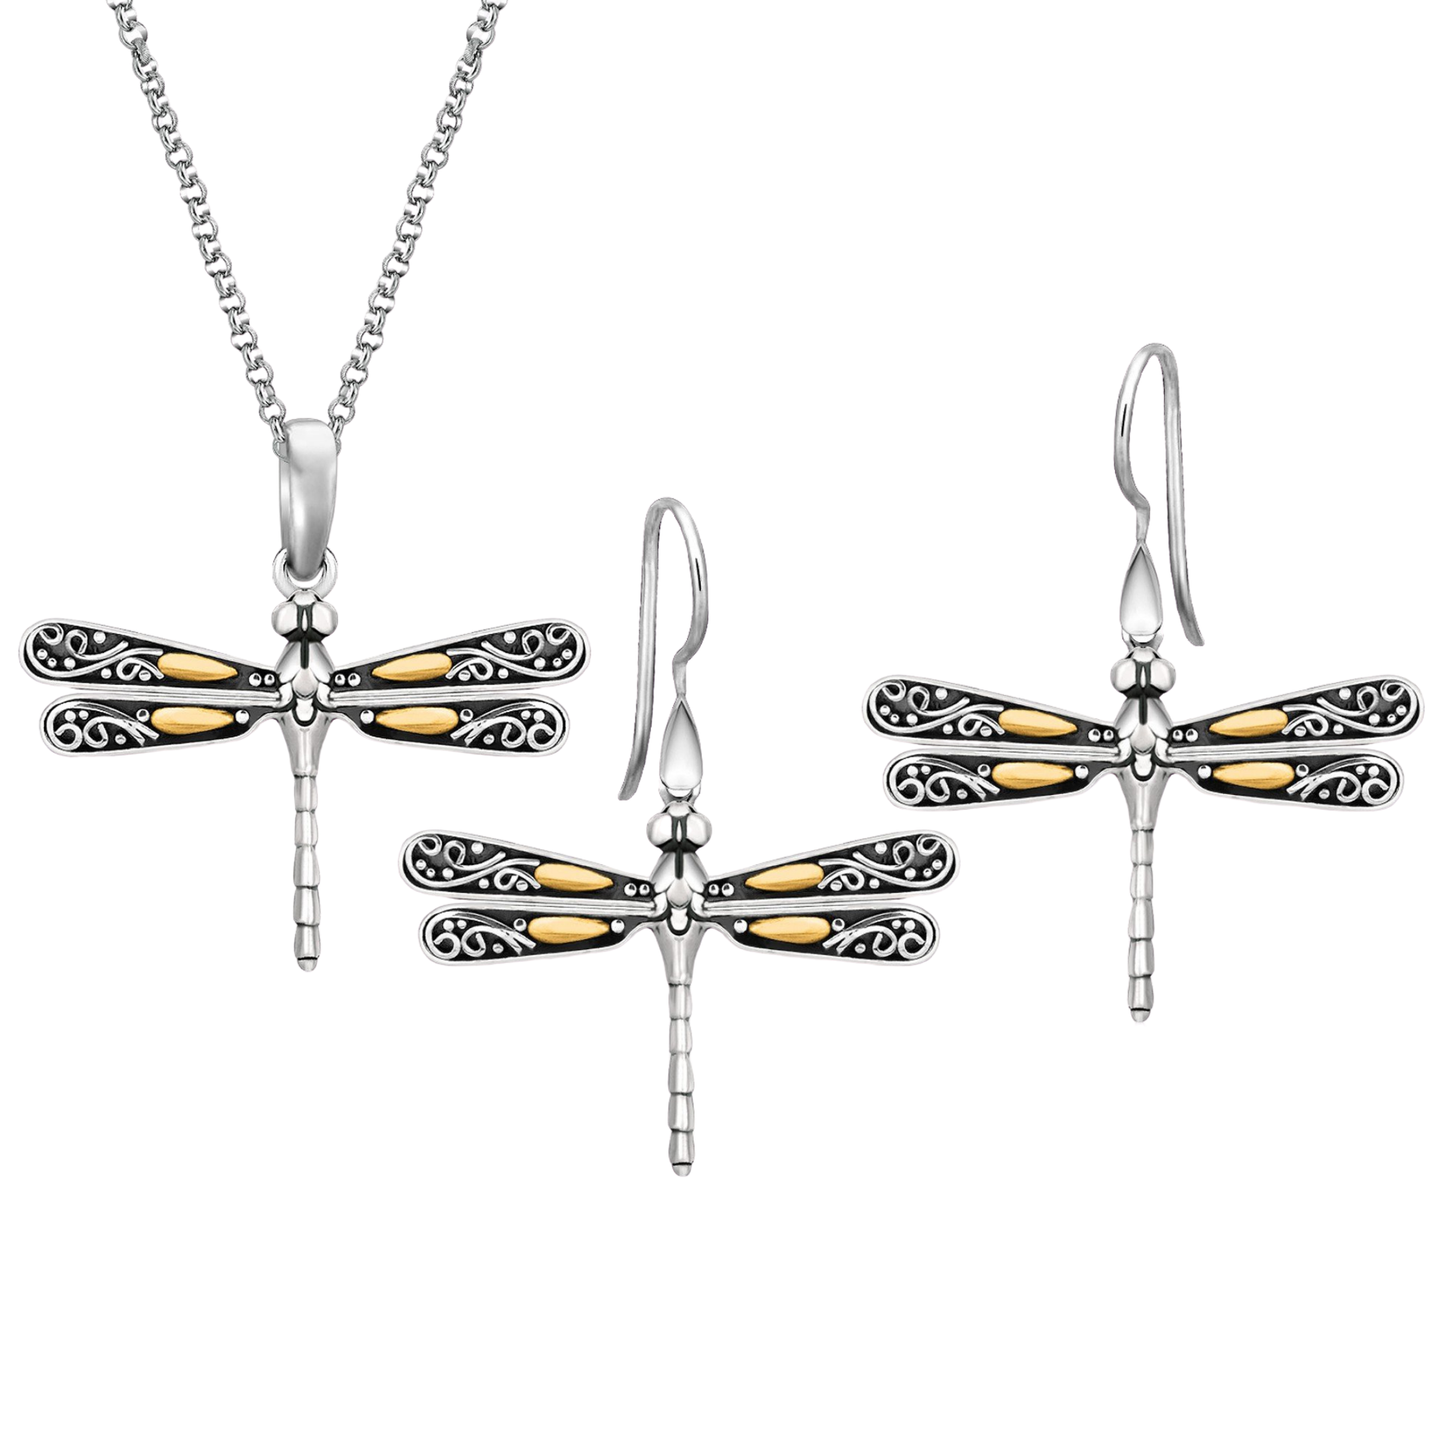 Dragonfly Necklace & Earrings Set